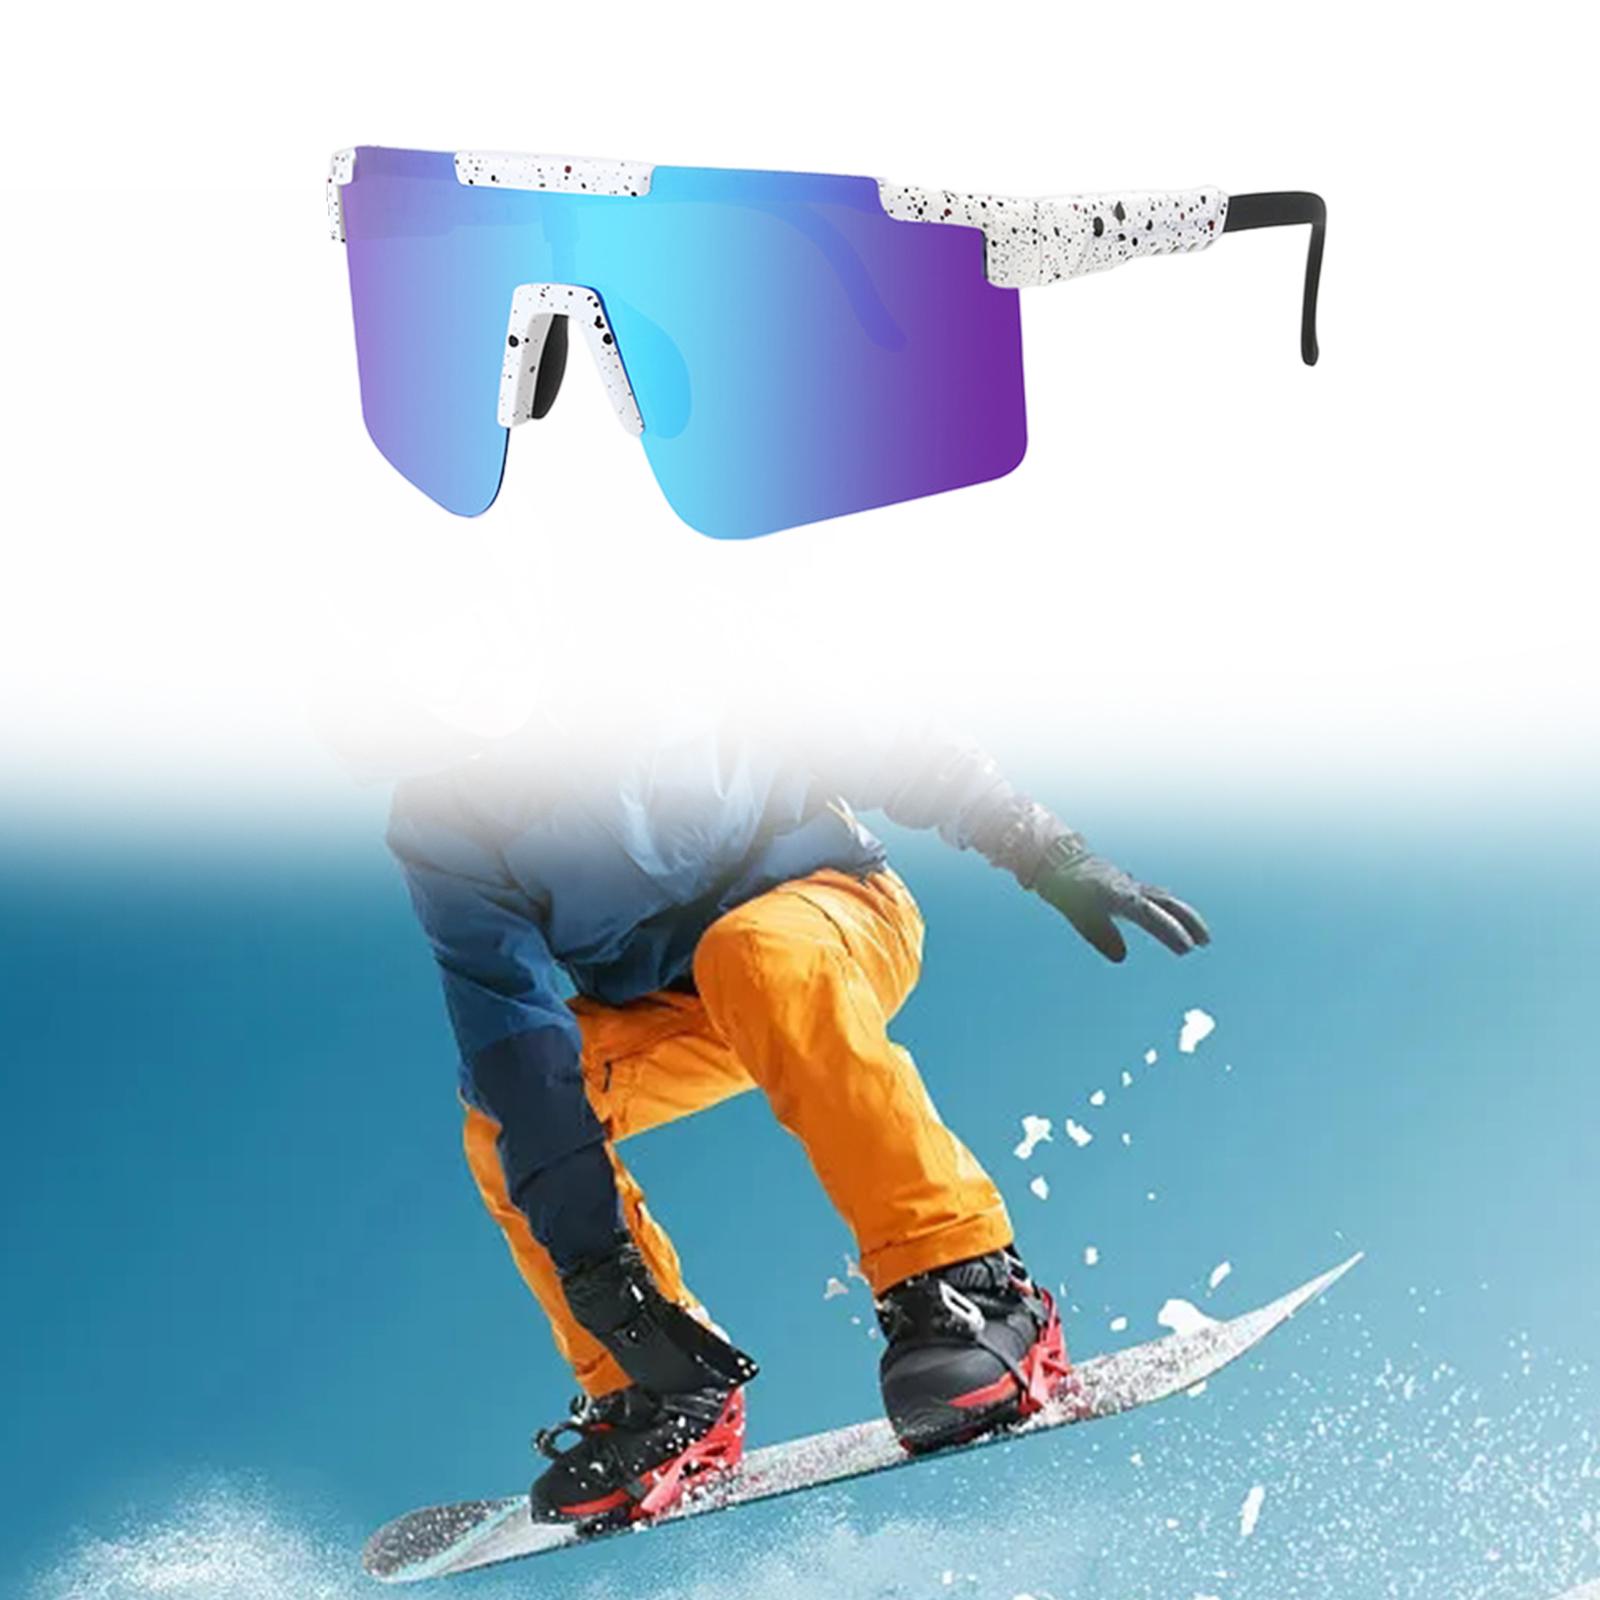 Polarized Sunglasses for Men and Women Cycling Sunglasses for Running Biking Purple